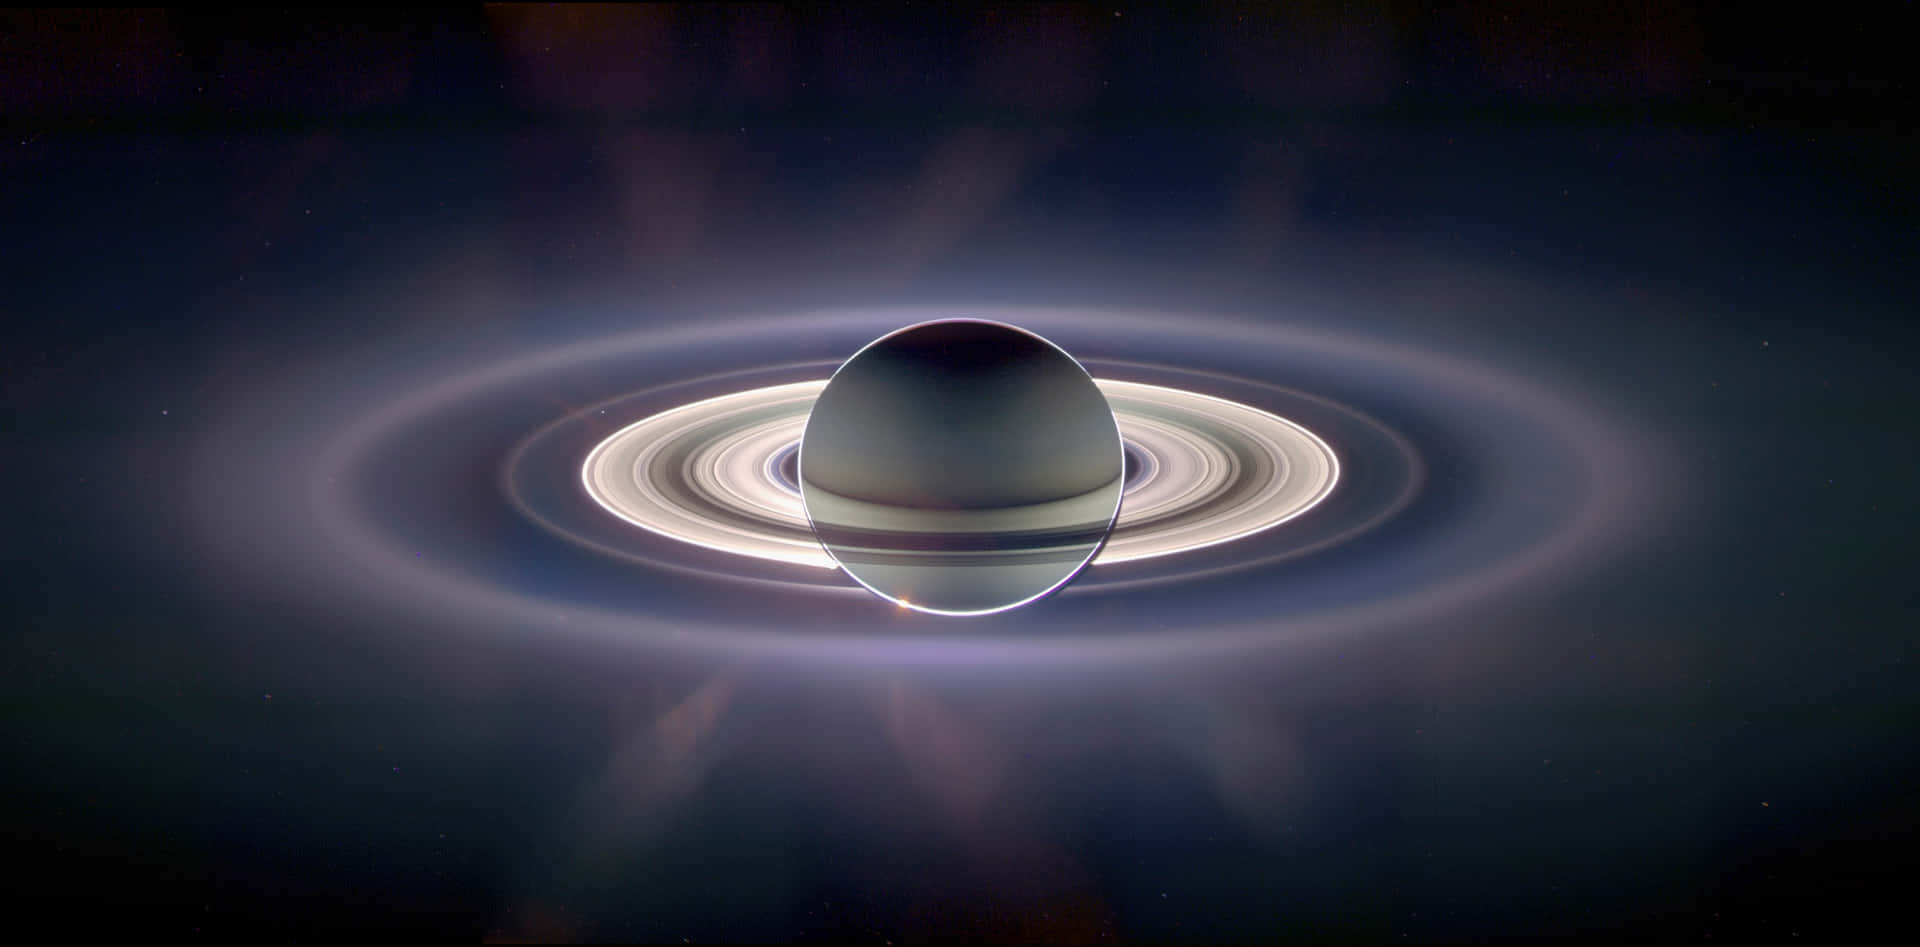 Saturn's Rings And Moons In A Dark Background